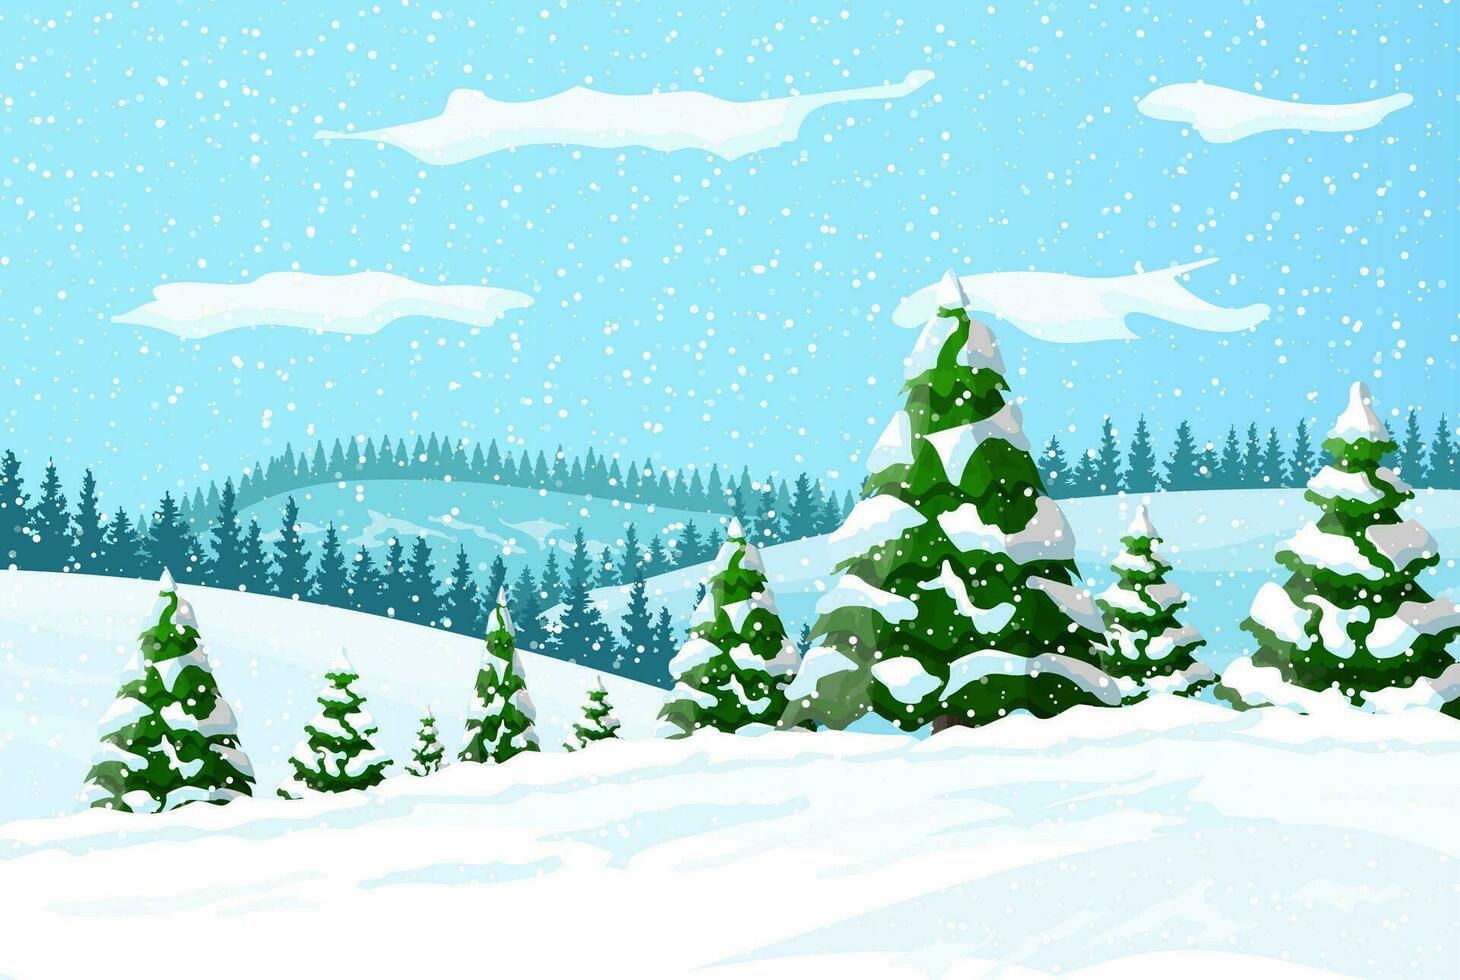 Winter landscape with white pine trees on snow hill. Christmas landscape with fir trees forest and snowing. Happy new year celebration. New year xmas holiday. Vector illustration flat style